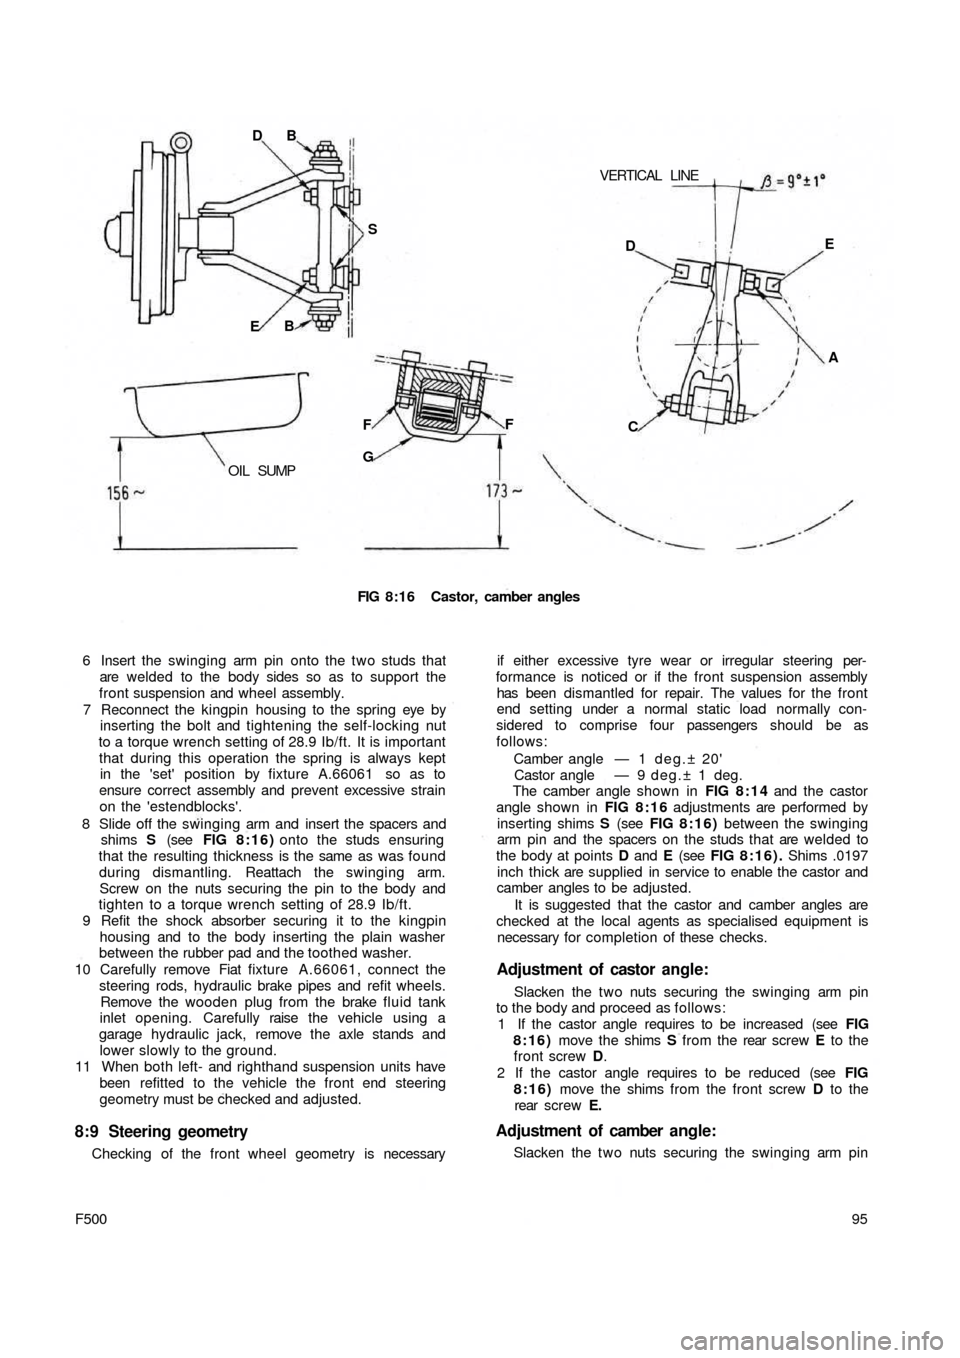 FIAT 500 1968 1.G Workshop Manual VERTICAL  LINE DB
S
EB
OIL  SUMPF
GF
FIG 8:16 Castor, camber angles
6 Insert the swinging arm pin onto the two studs that
are welded  to the  body sides so as to support the
front suspension and wheel